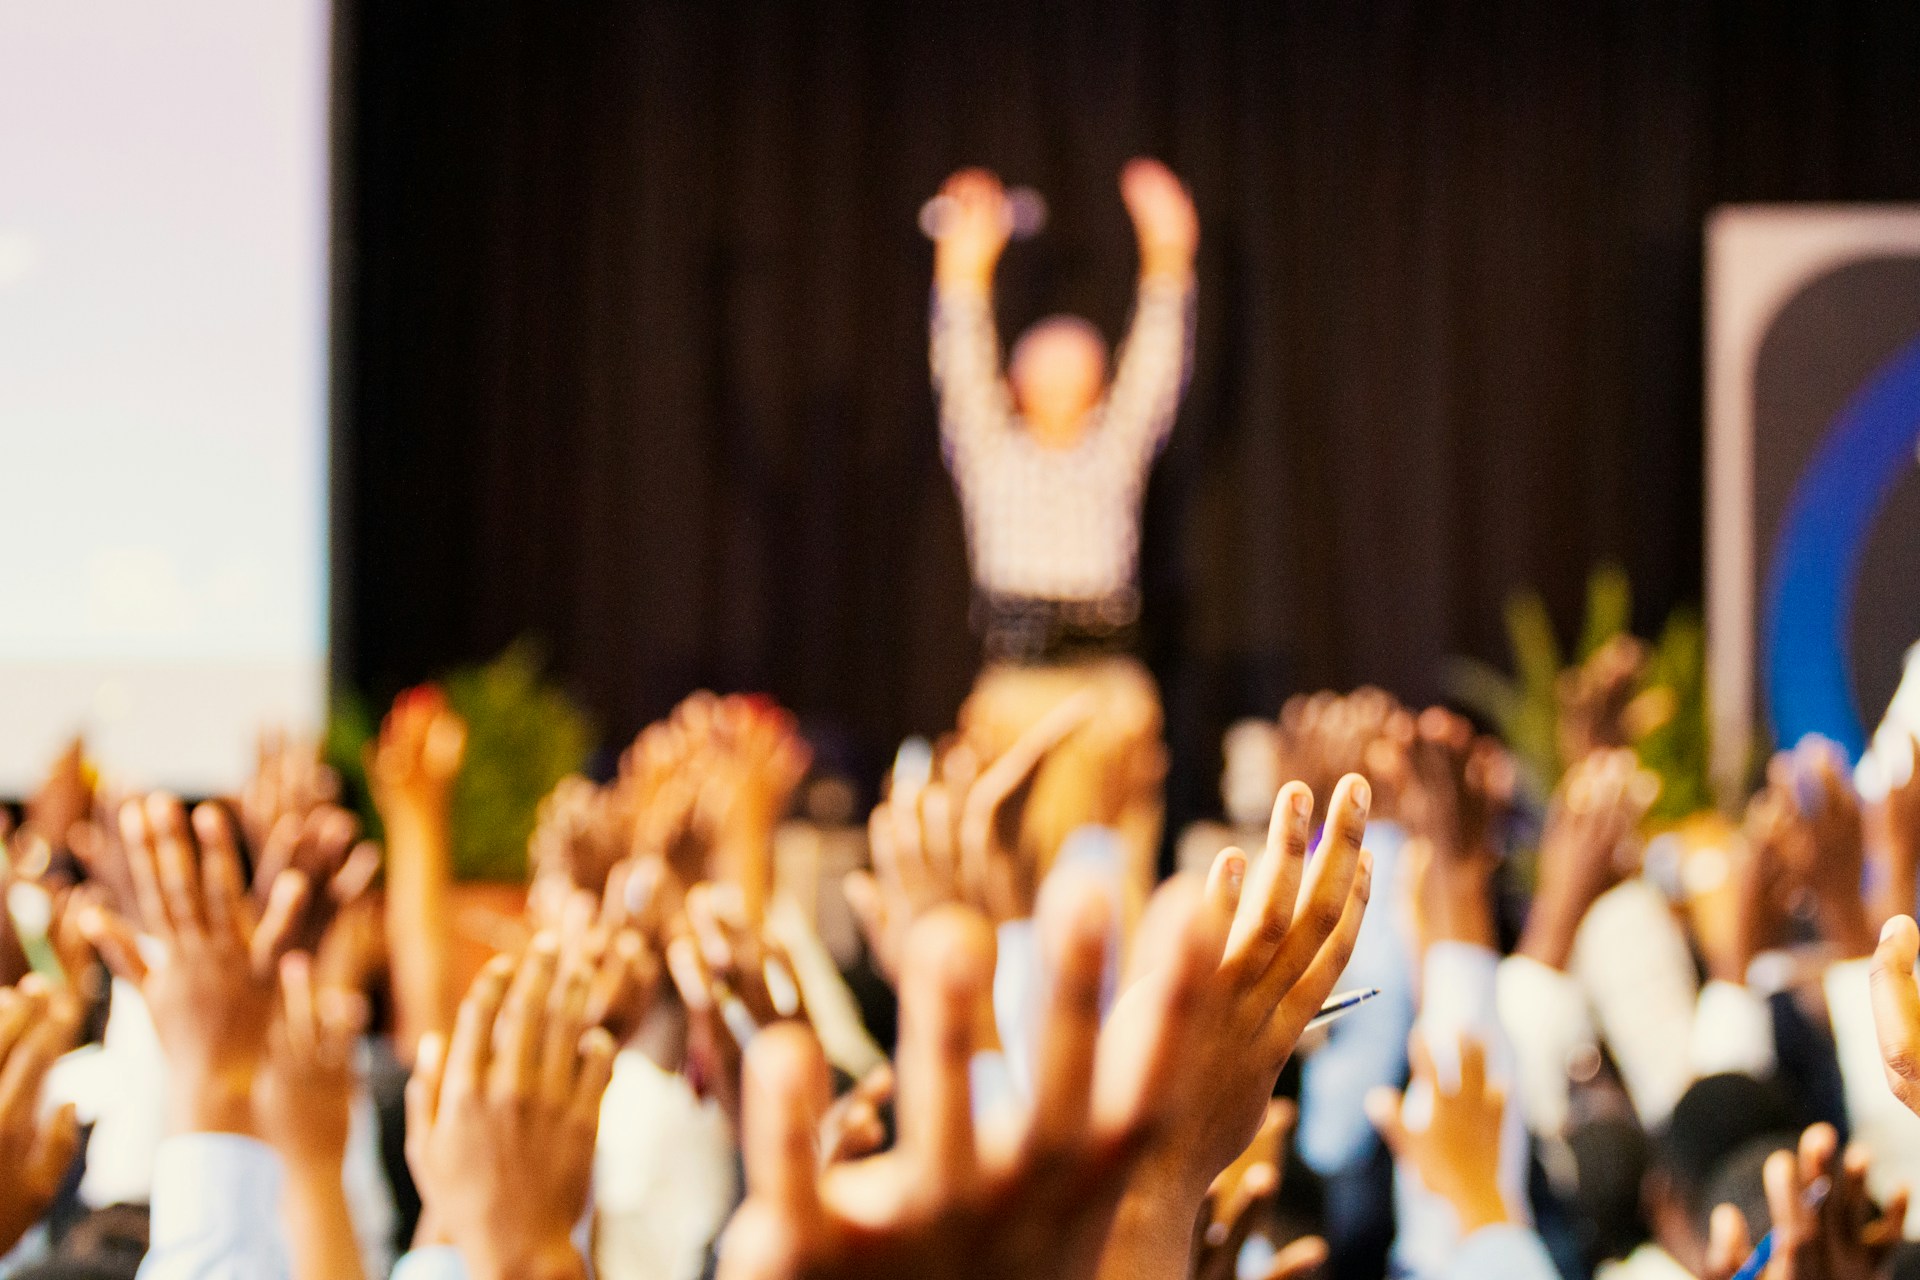 Image of many raised hands